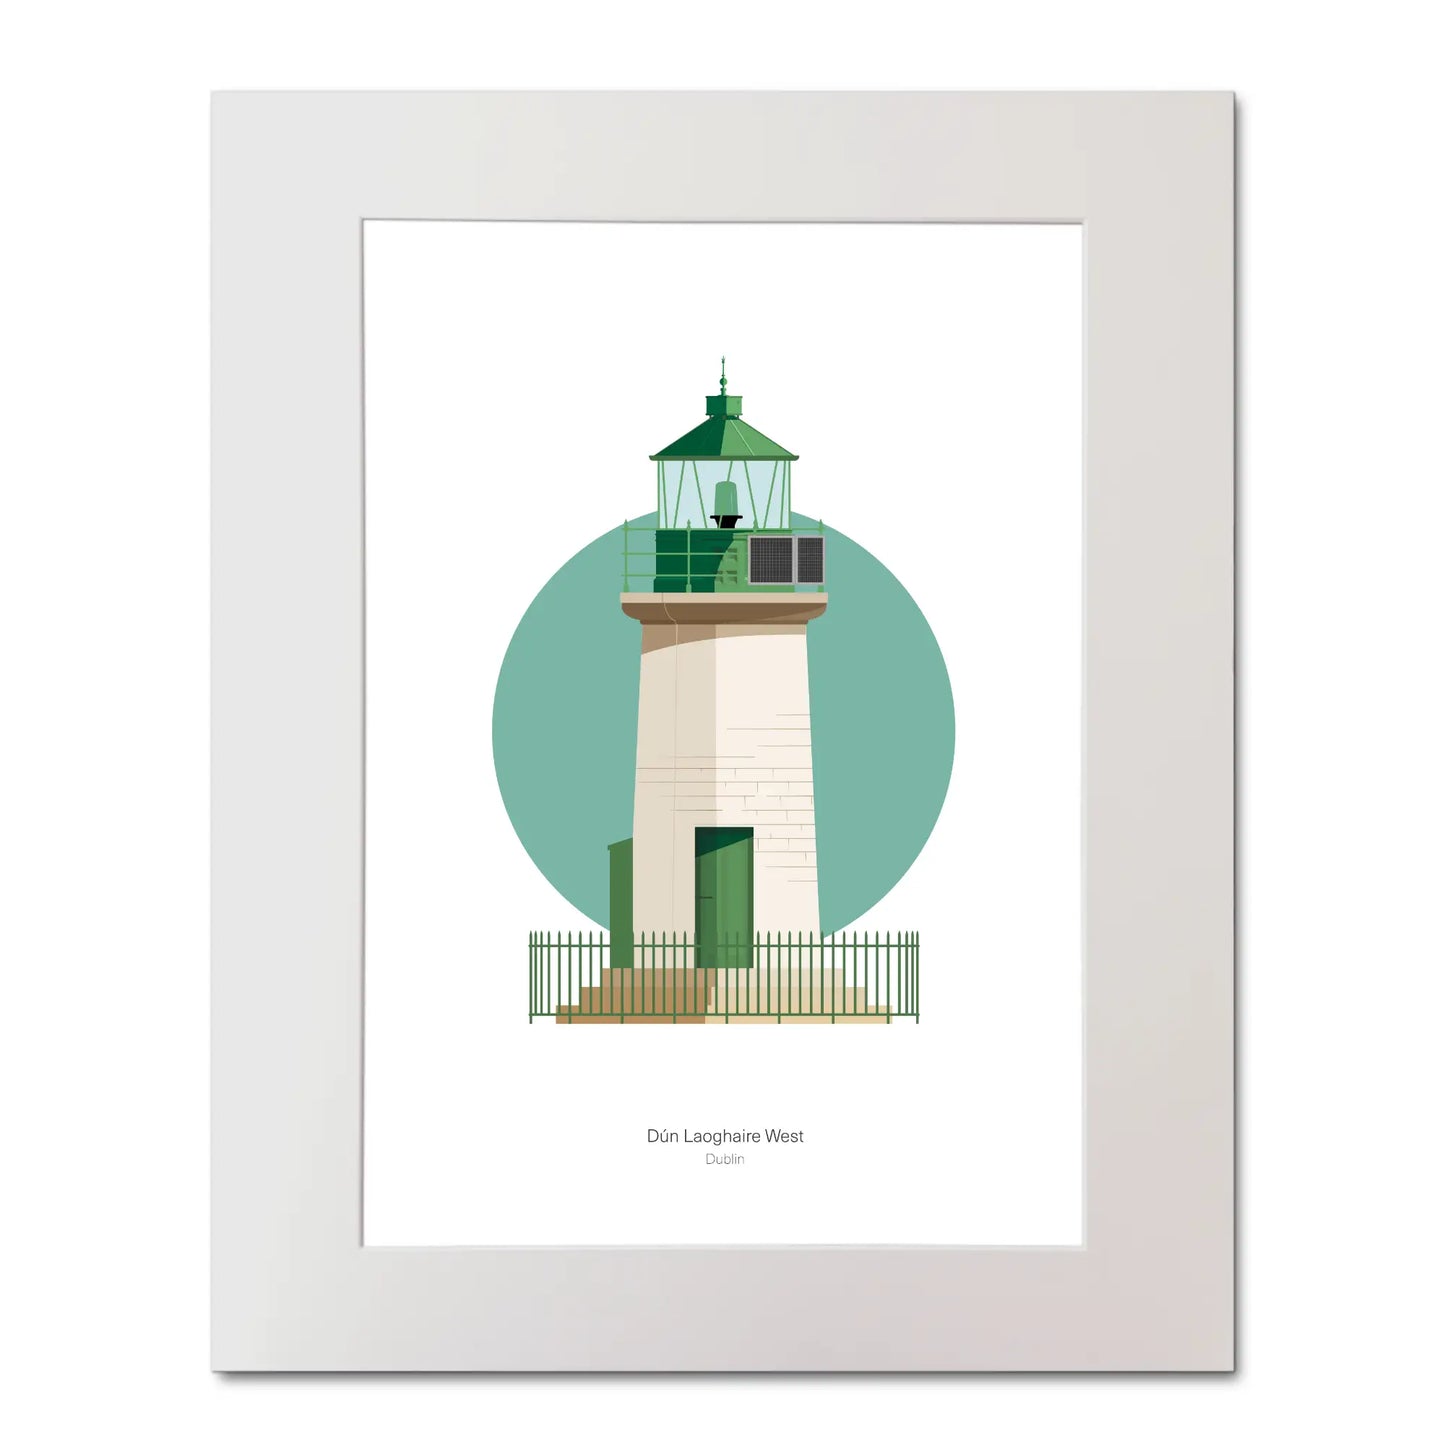 Illustration of Dún Laoghaire West lighthouse on a white background inside light blue square, mounted and measuring 40x50cm.